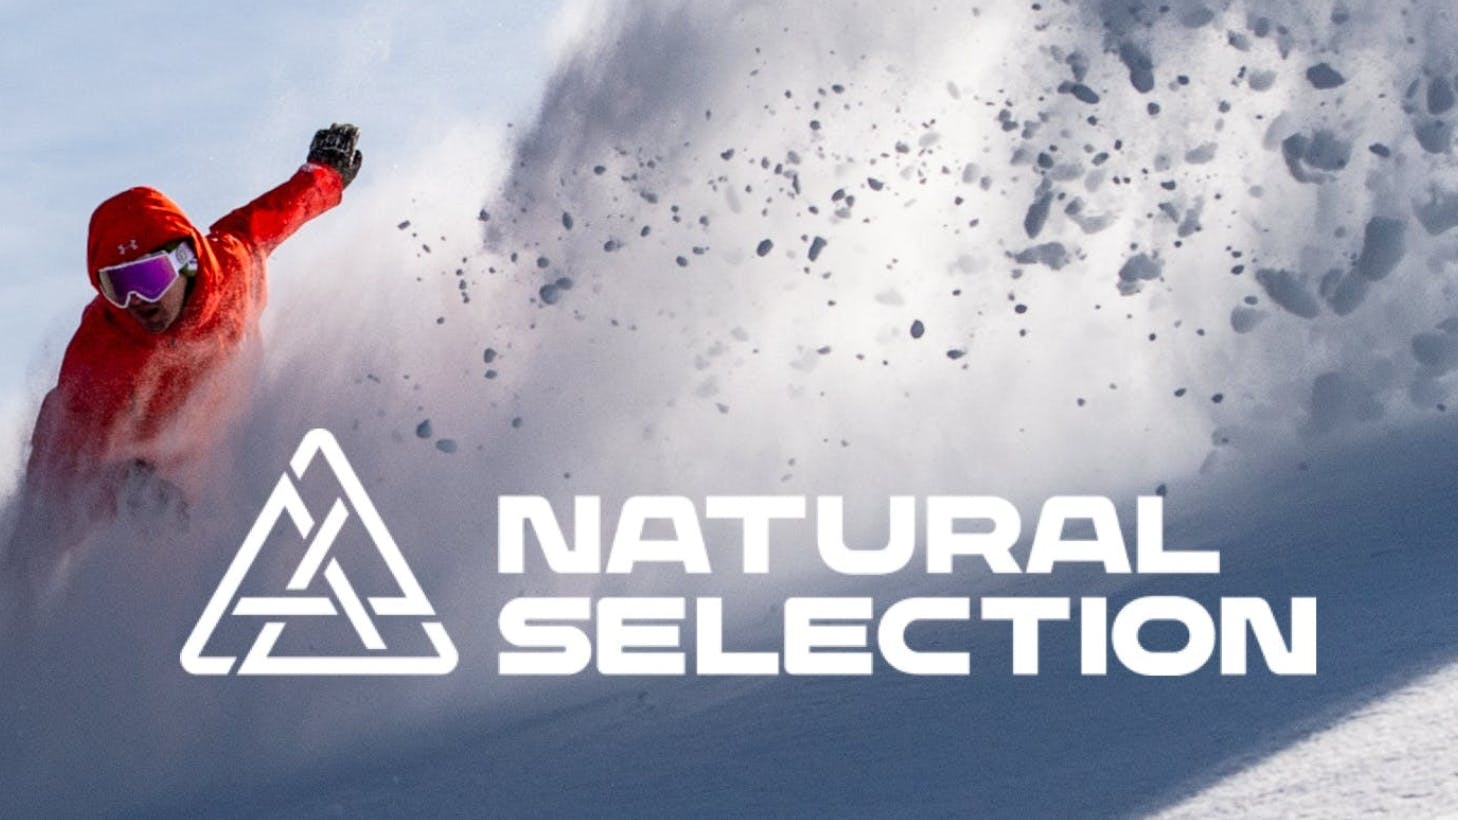 A snowboarder turning down a snowy mountain side with a logo overlaid that reads "Natural Selection".